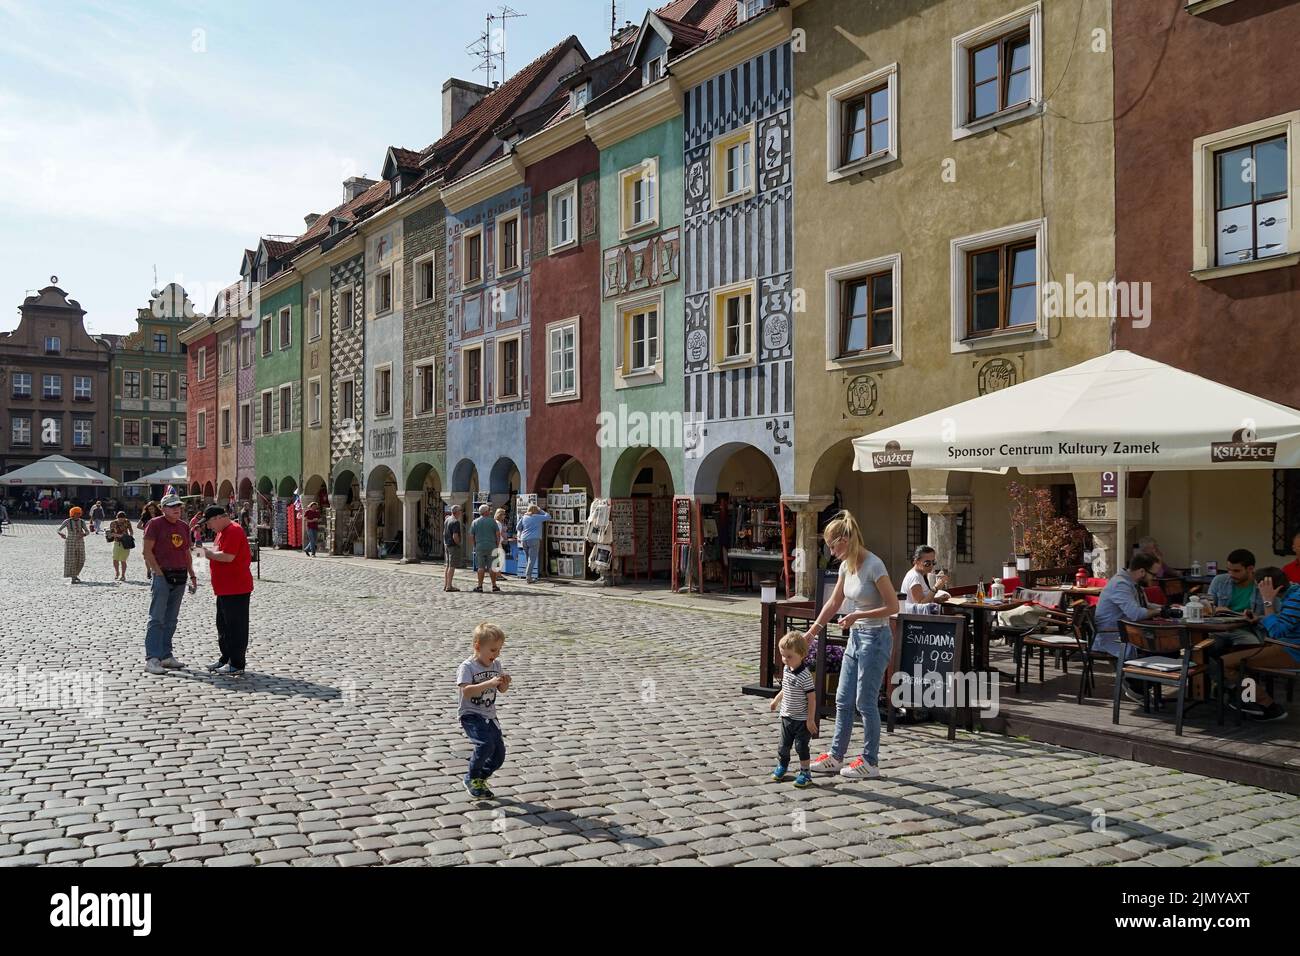 Poznan, Poland - September 16, 2014 : Row of multicoloured houses in Poznan on September 16, 2014. Unidentified people Stock Photo